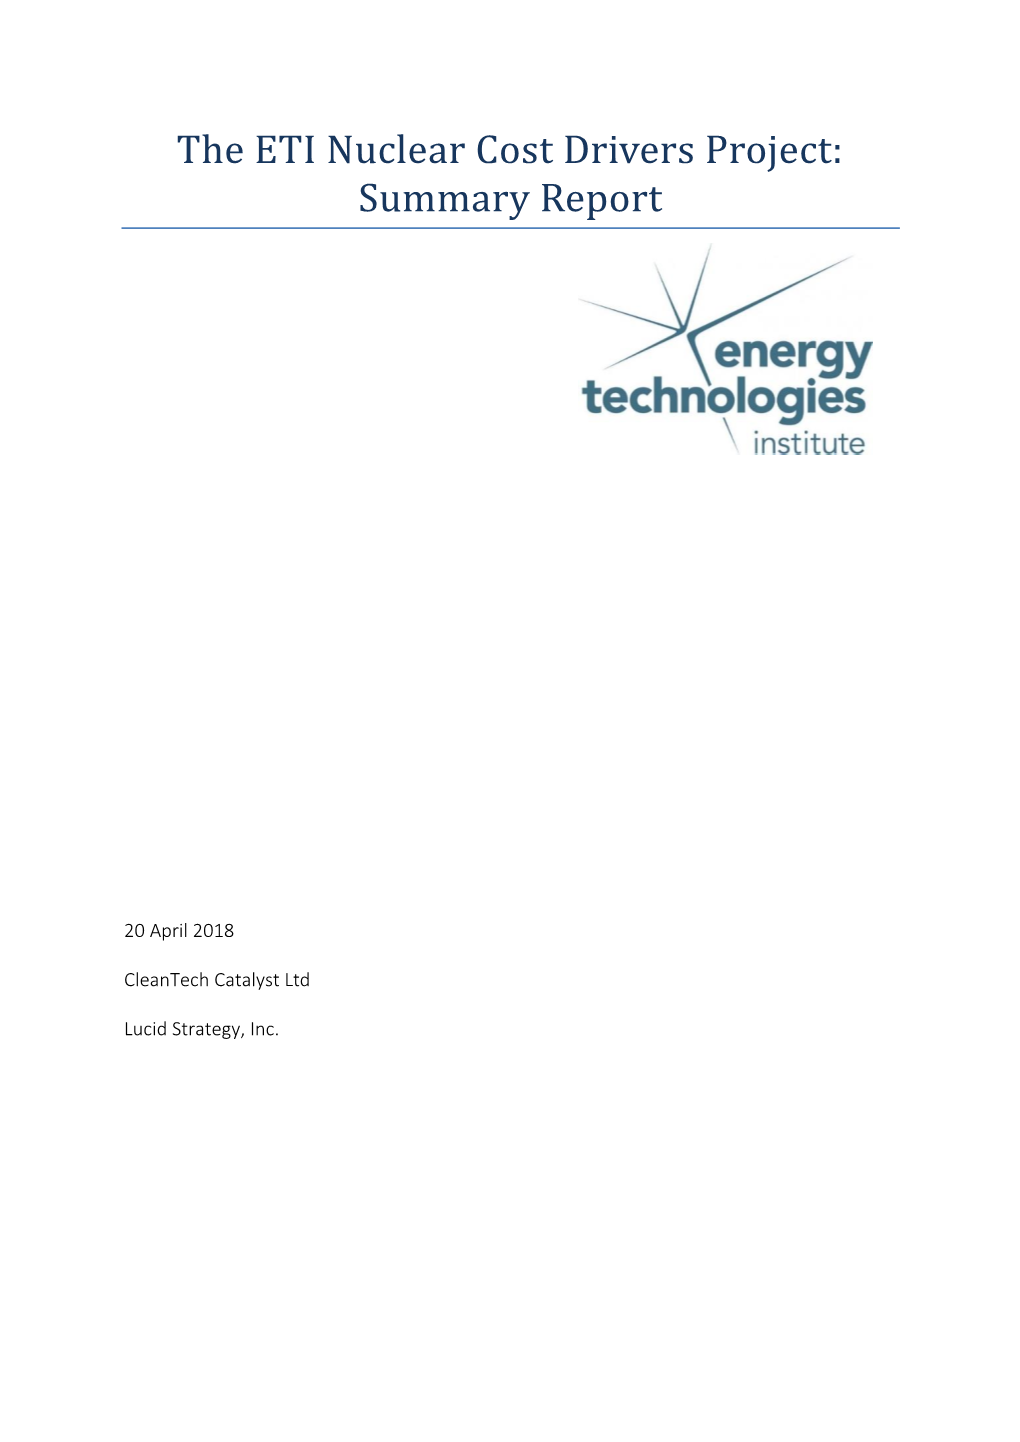 The ETI Nuclear Cost Drivers Project: Summary Report